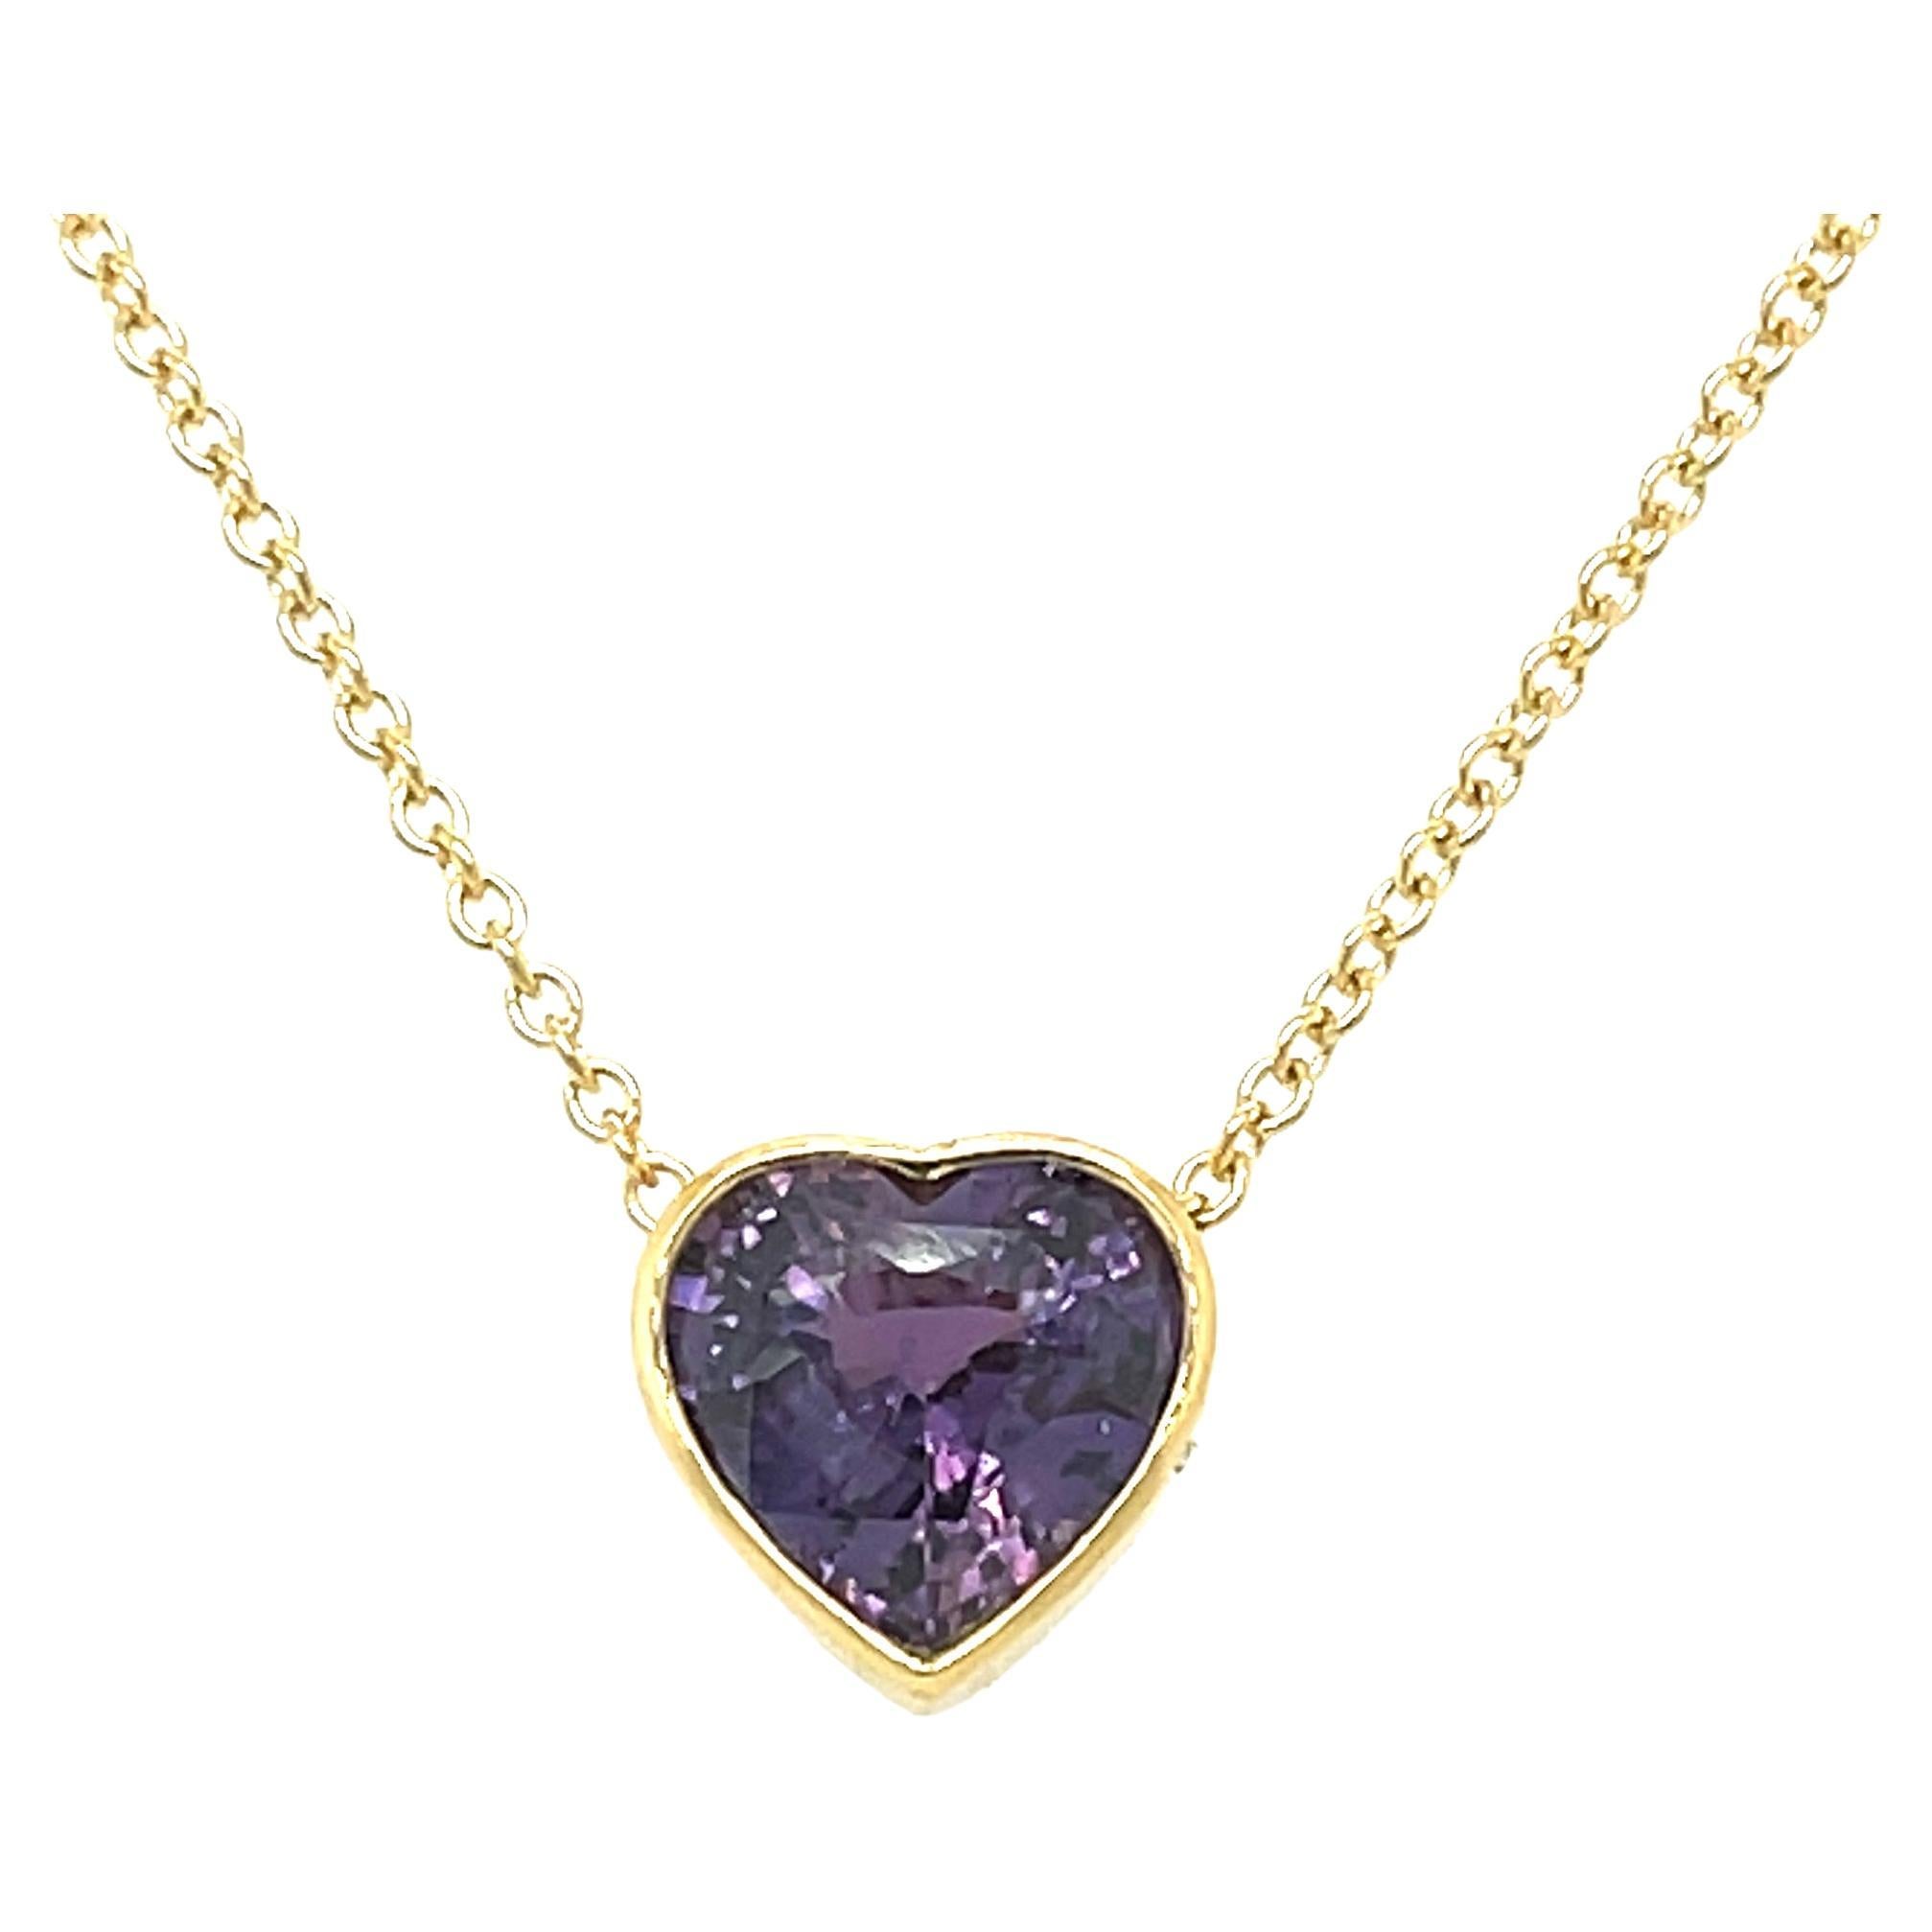 GIA Certified Unheated 3.56 Carat Purple Sapphire Heart Necklace in 18k Gold For Sale